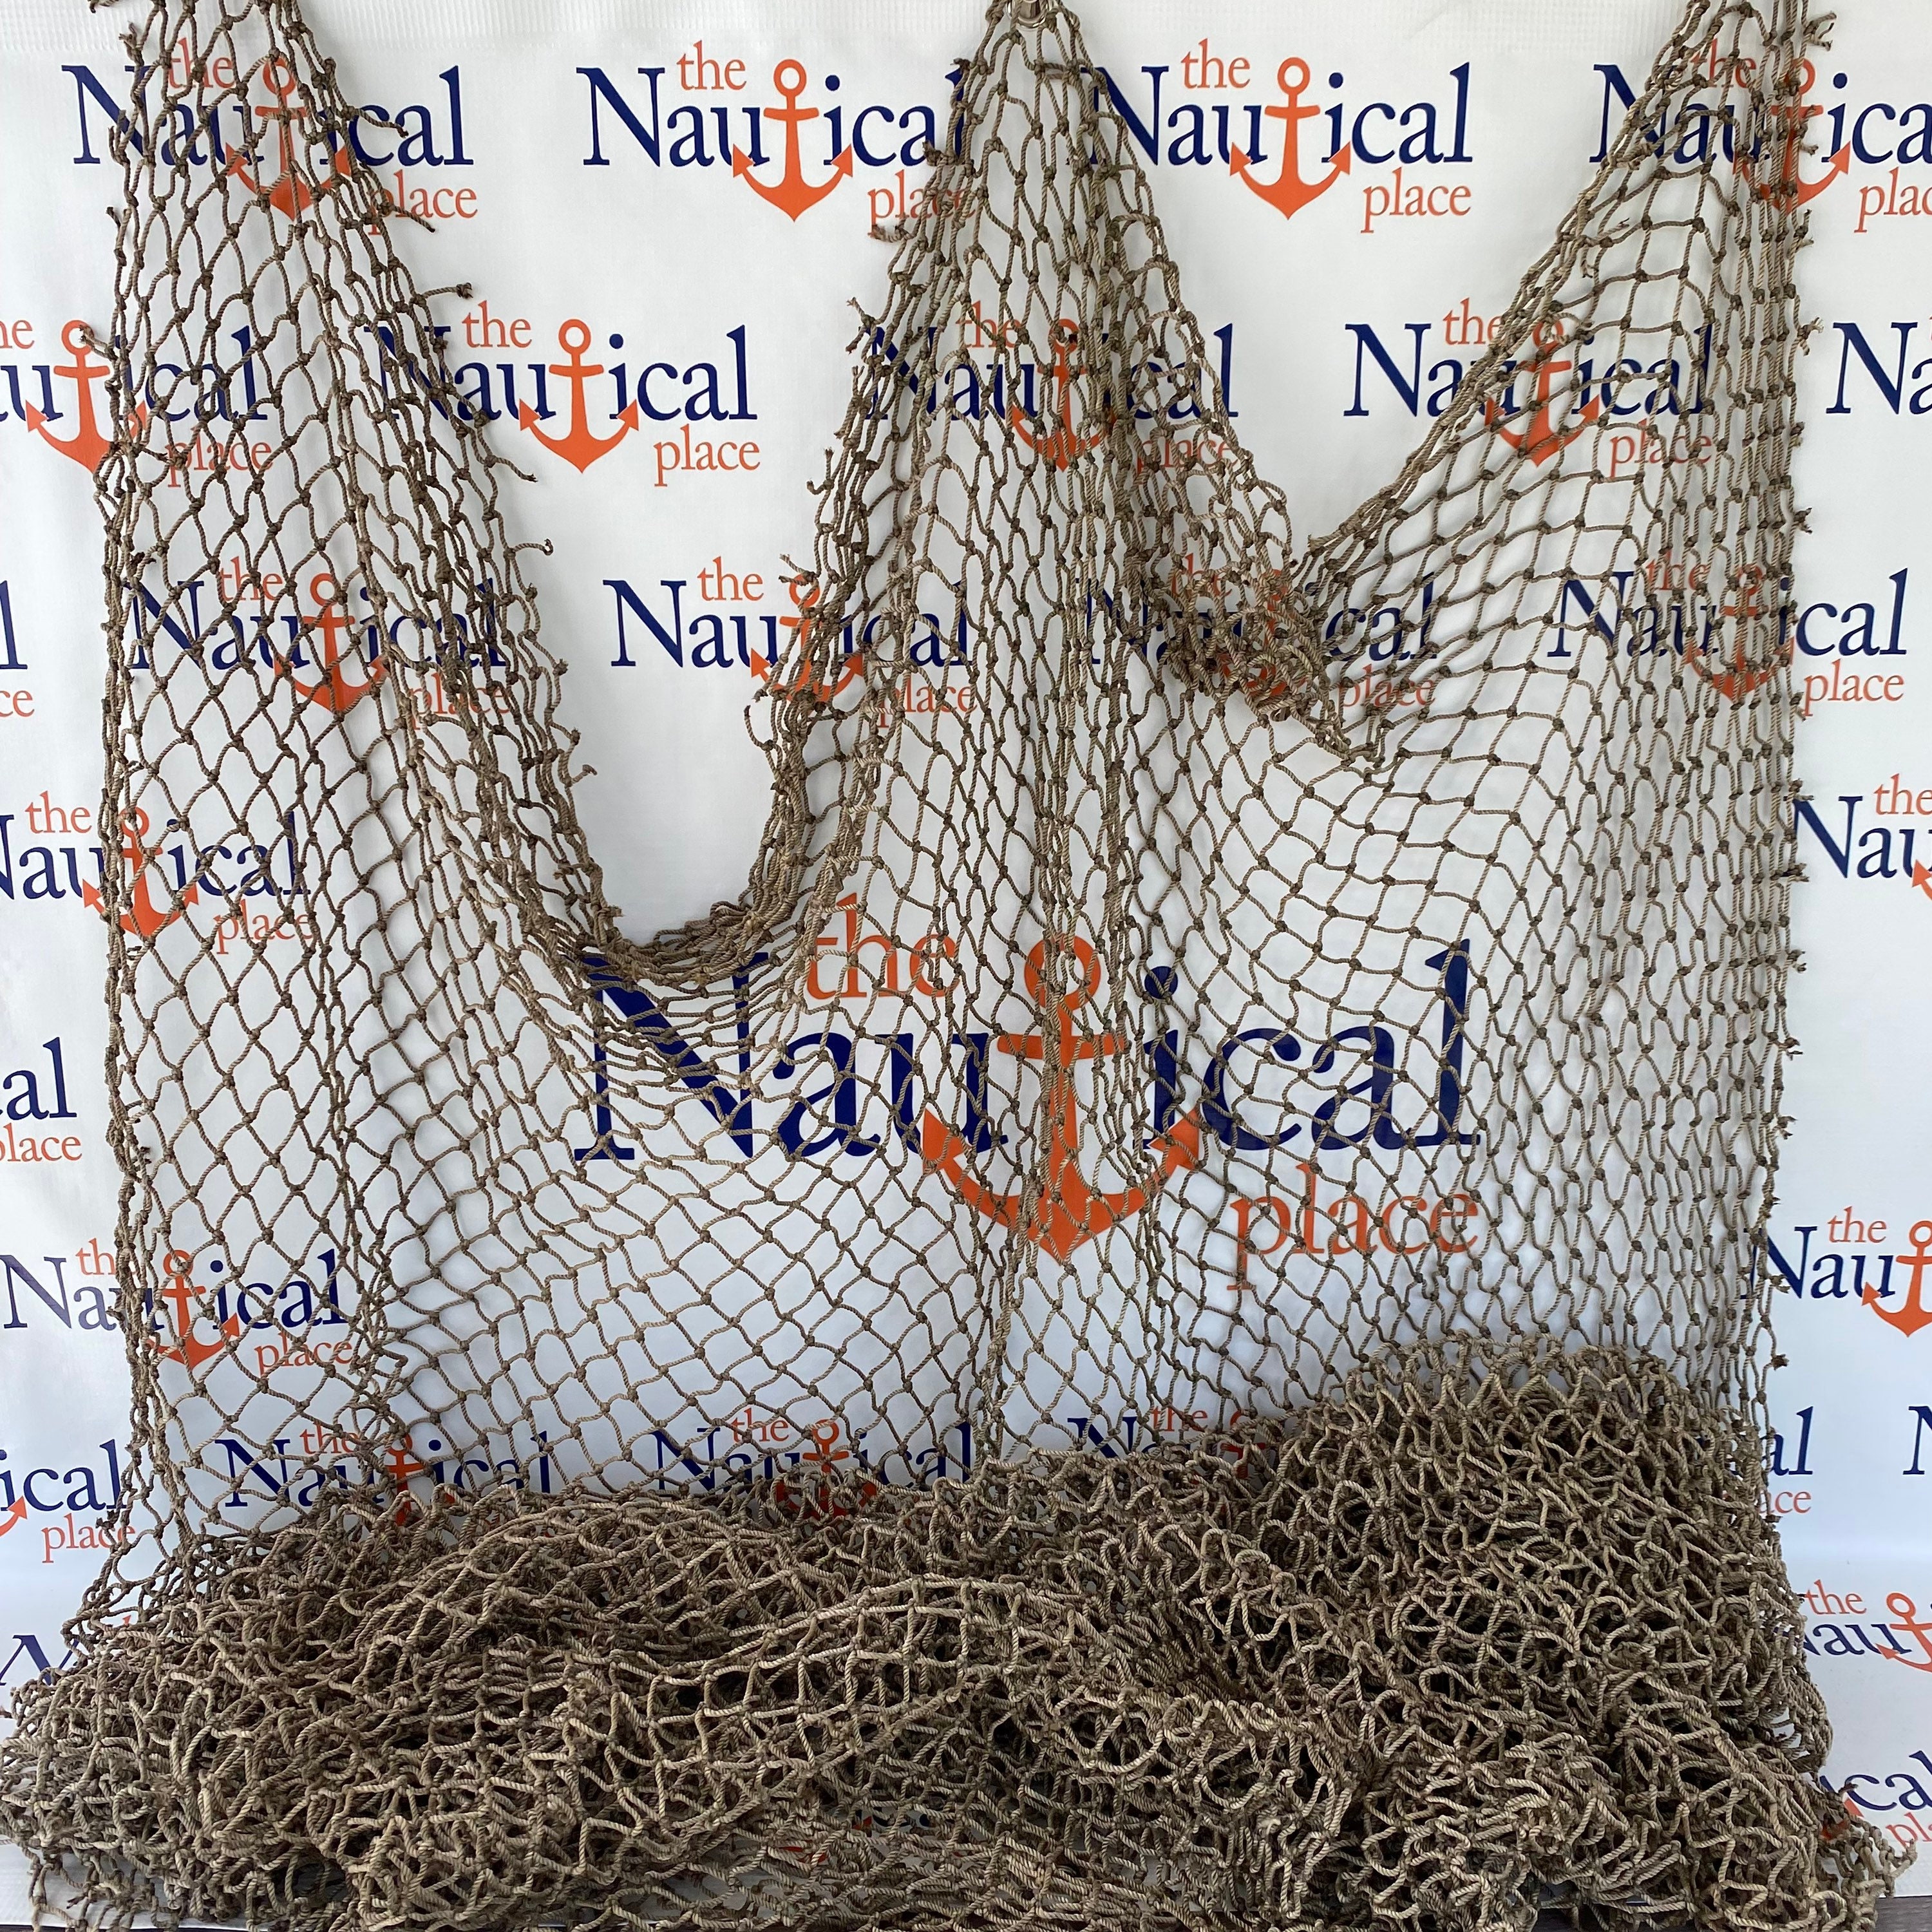 Authentic Fishing Net - Commercial Fish Netting - Vintage Fish Net